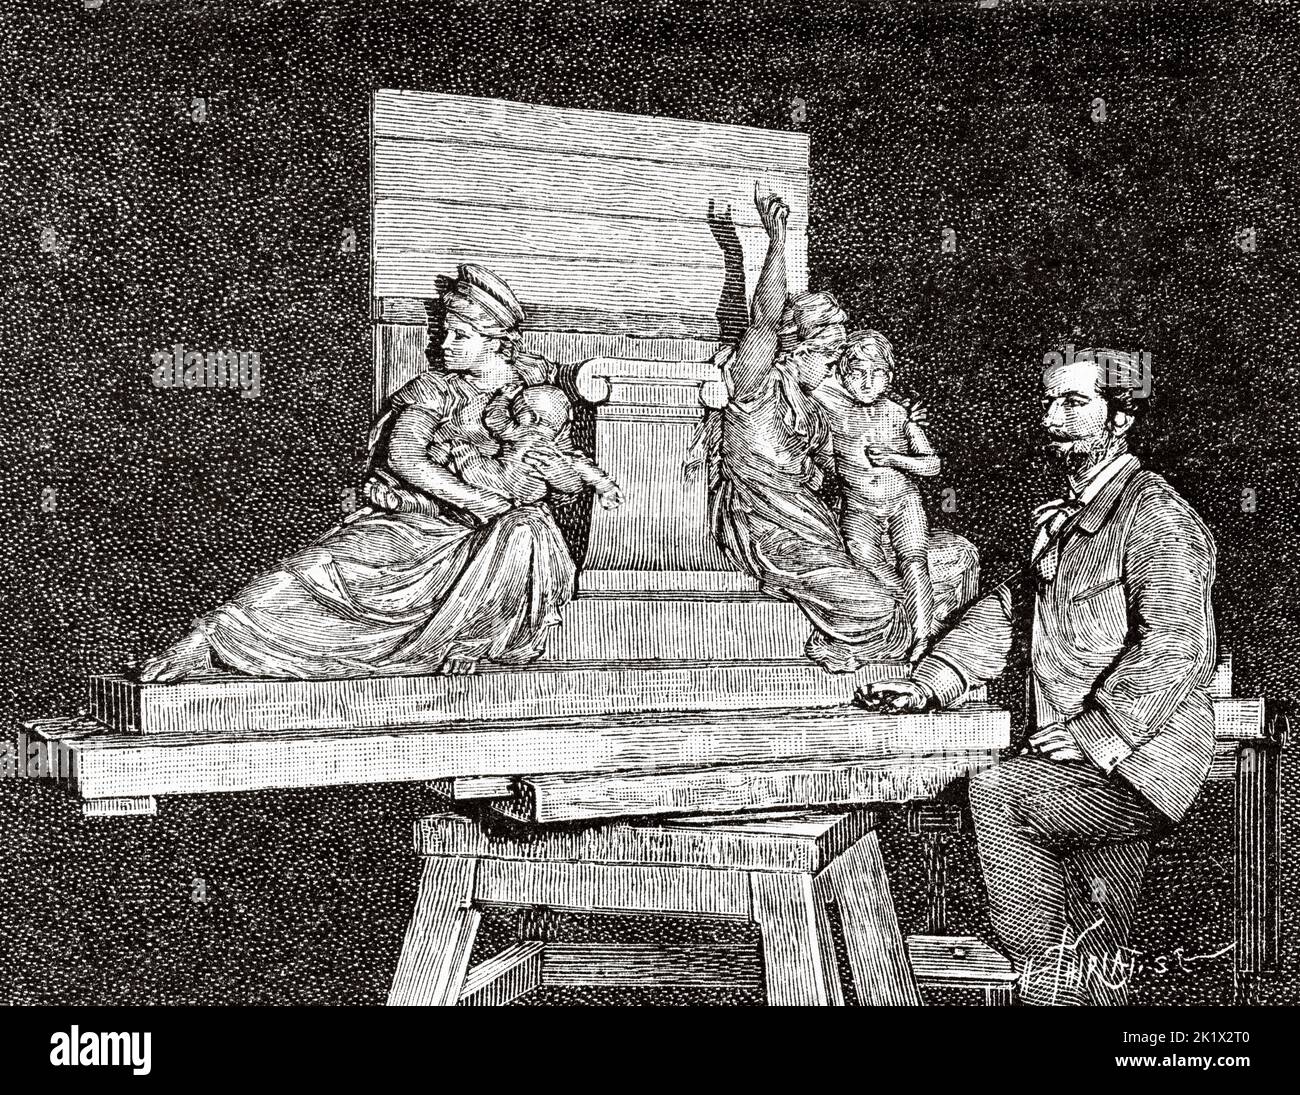 Frédéric Auguste Bartholdi (1834-1904) was a French sculptor and painter who is best known for designing Statue of Liberty. Old 19th century engraved illustration from La Nature 1890 Stock Photo